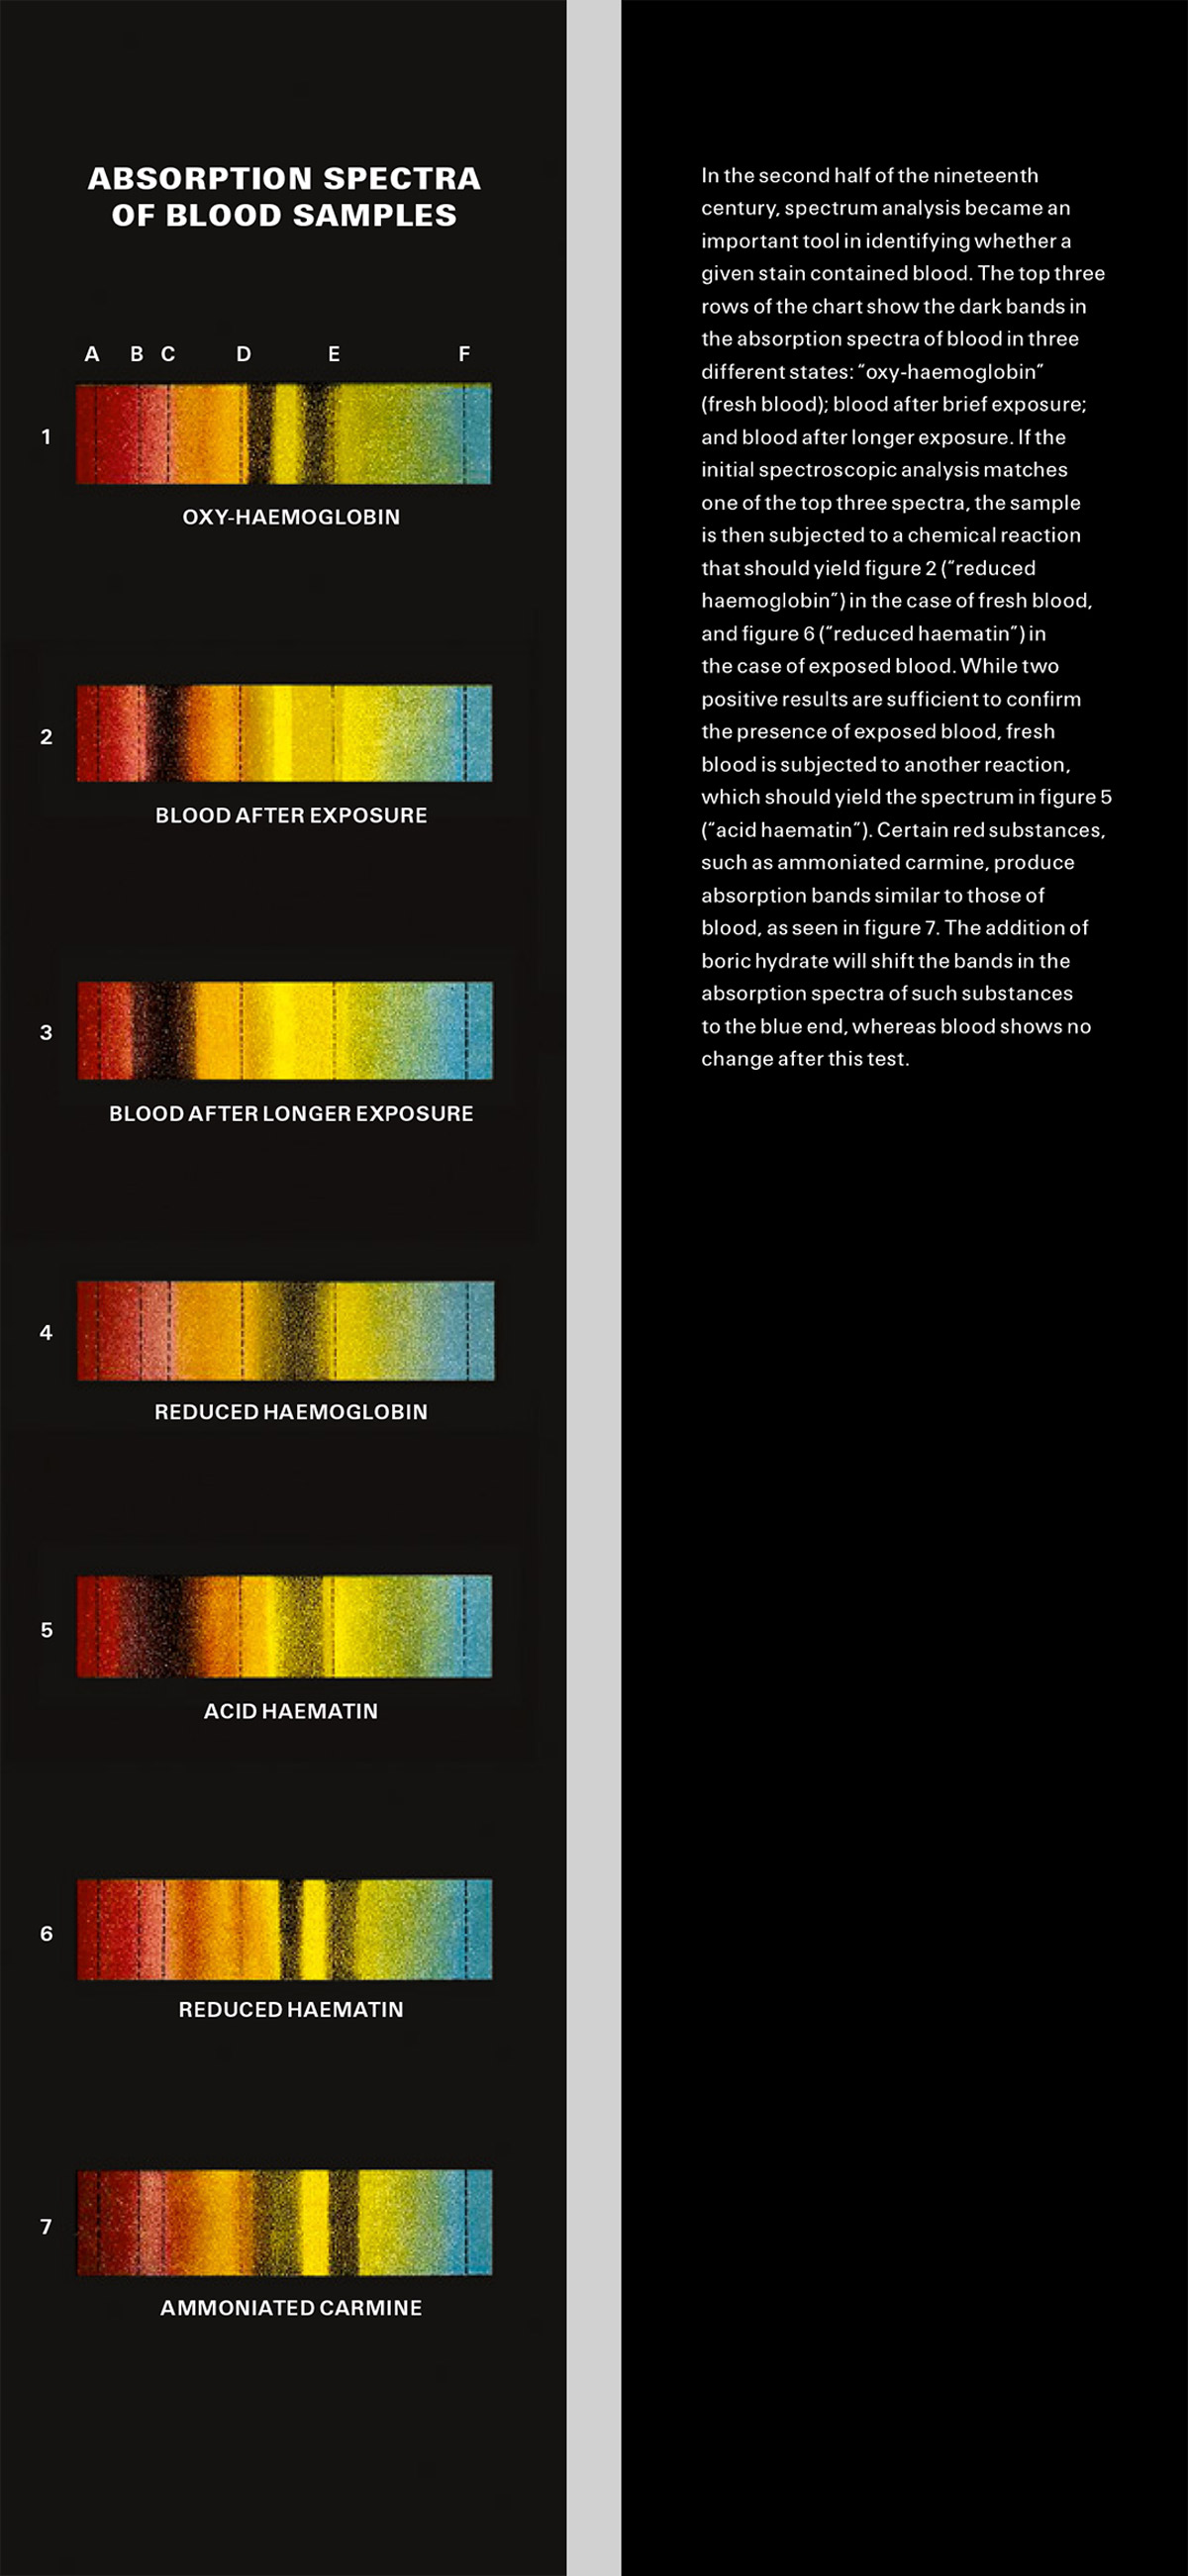 The front of this issue’s bookmark depicts the absorption spectra of blood samples. The back contains text that reads: “In the second half of the nineteenth century, spectrum analysis became an important tool in identifying whether a given stain contained blood. The top three rows of the chart show the dark bands in the absorption spectra of blood in three different states: “oxy-haemoglobin” (fresh blood); blood after brief exposure; and blood after longer exposure. If the initial spectroscopic analysis matches one of the top three spectra, the sample is then subjected to a chemical reaction that should yield figure 2 (“reduced haemoglobin”) in the case of fresh blood, and figure 6 (“reduced haematin”) in the case of exposed blood. While two positive results are sufficient to confirm the presence of exposed blood, fresh blood is subjected to another reaction, which should yield the spectrum in figure 5 (“acid haematin”). Certain red substances, such as ammoniated carmine, produce absorption bands similar to those of blood, as seen in figure 7. The addition of boric hydrate will shift the bands in the absorption spectra of such substances to the blue end, whereas blood shows no change after this test.”